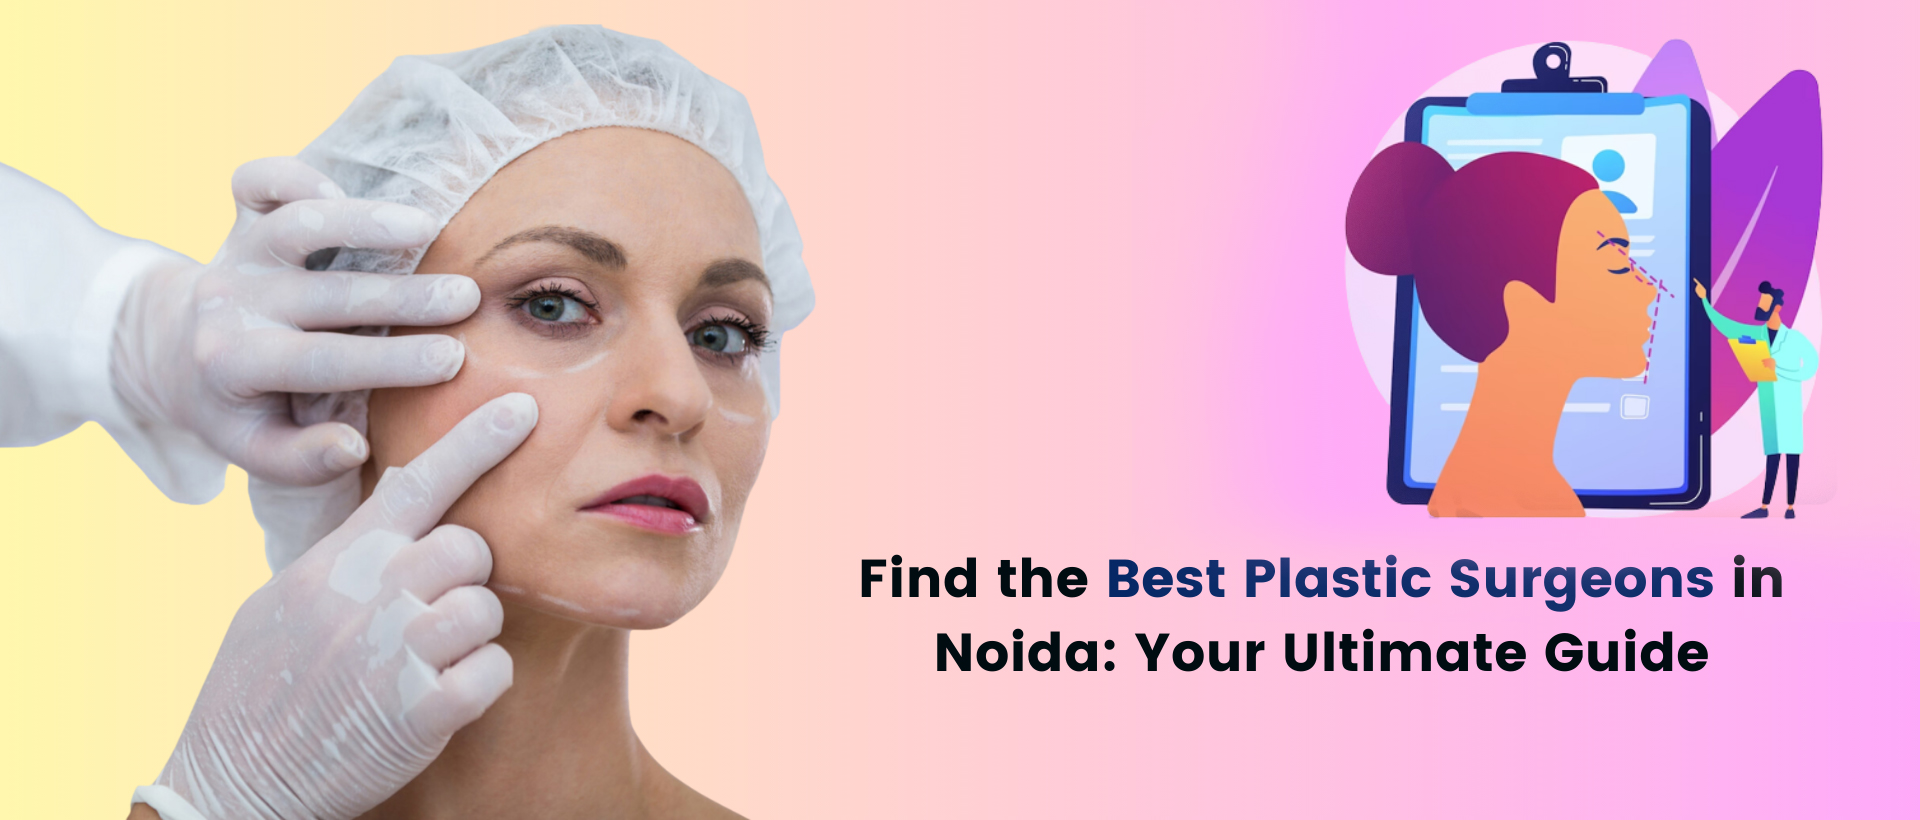 Find the best plastic surgeons in noida: your ultimate guide